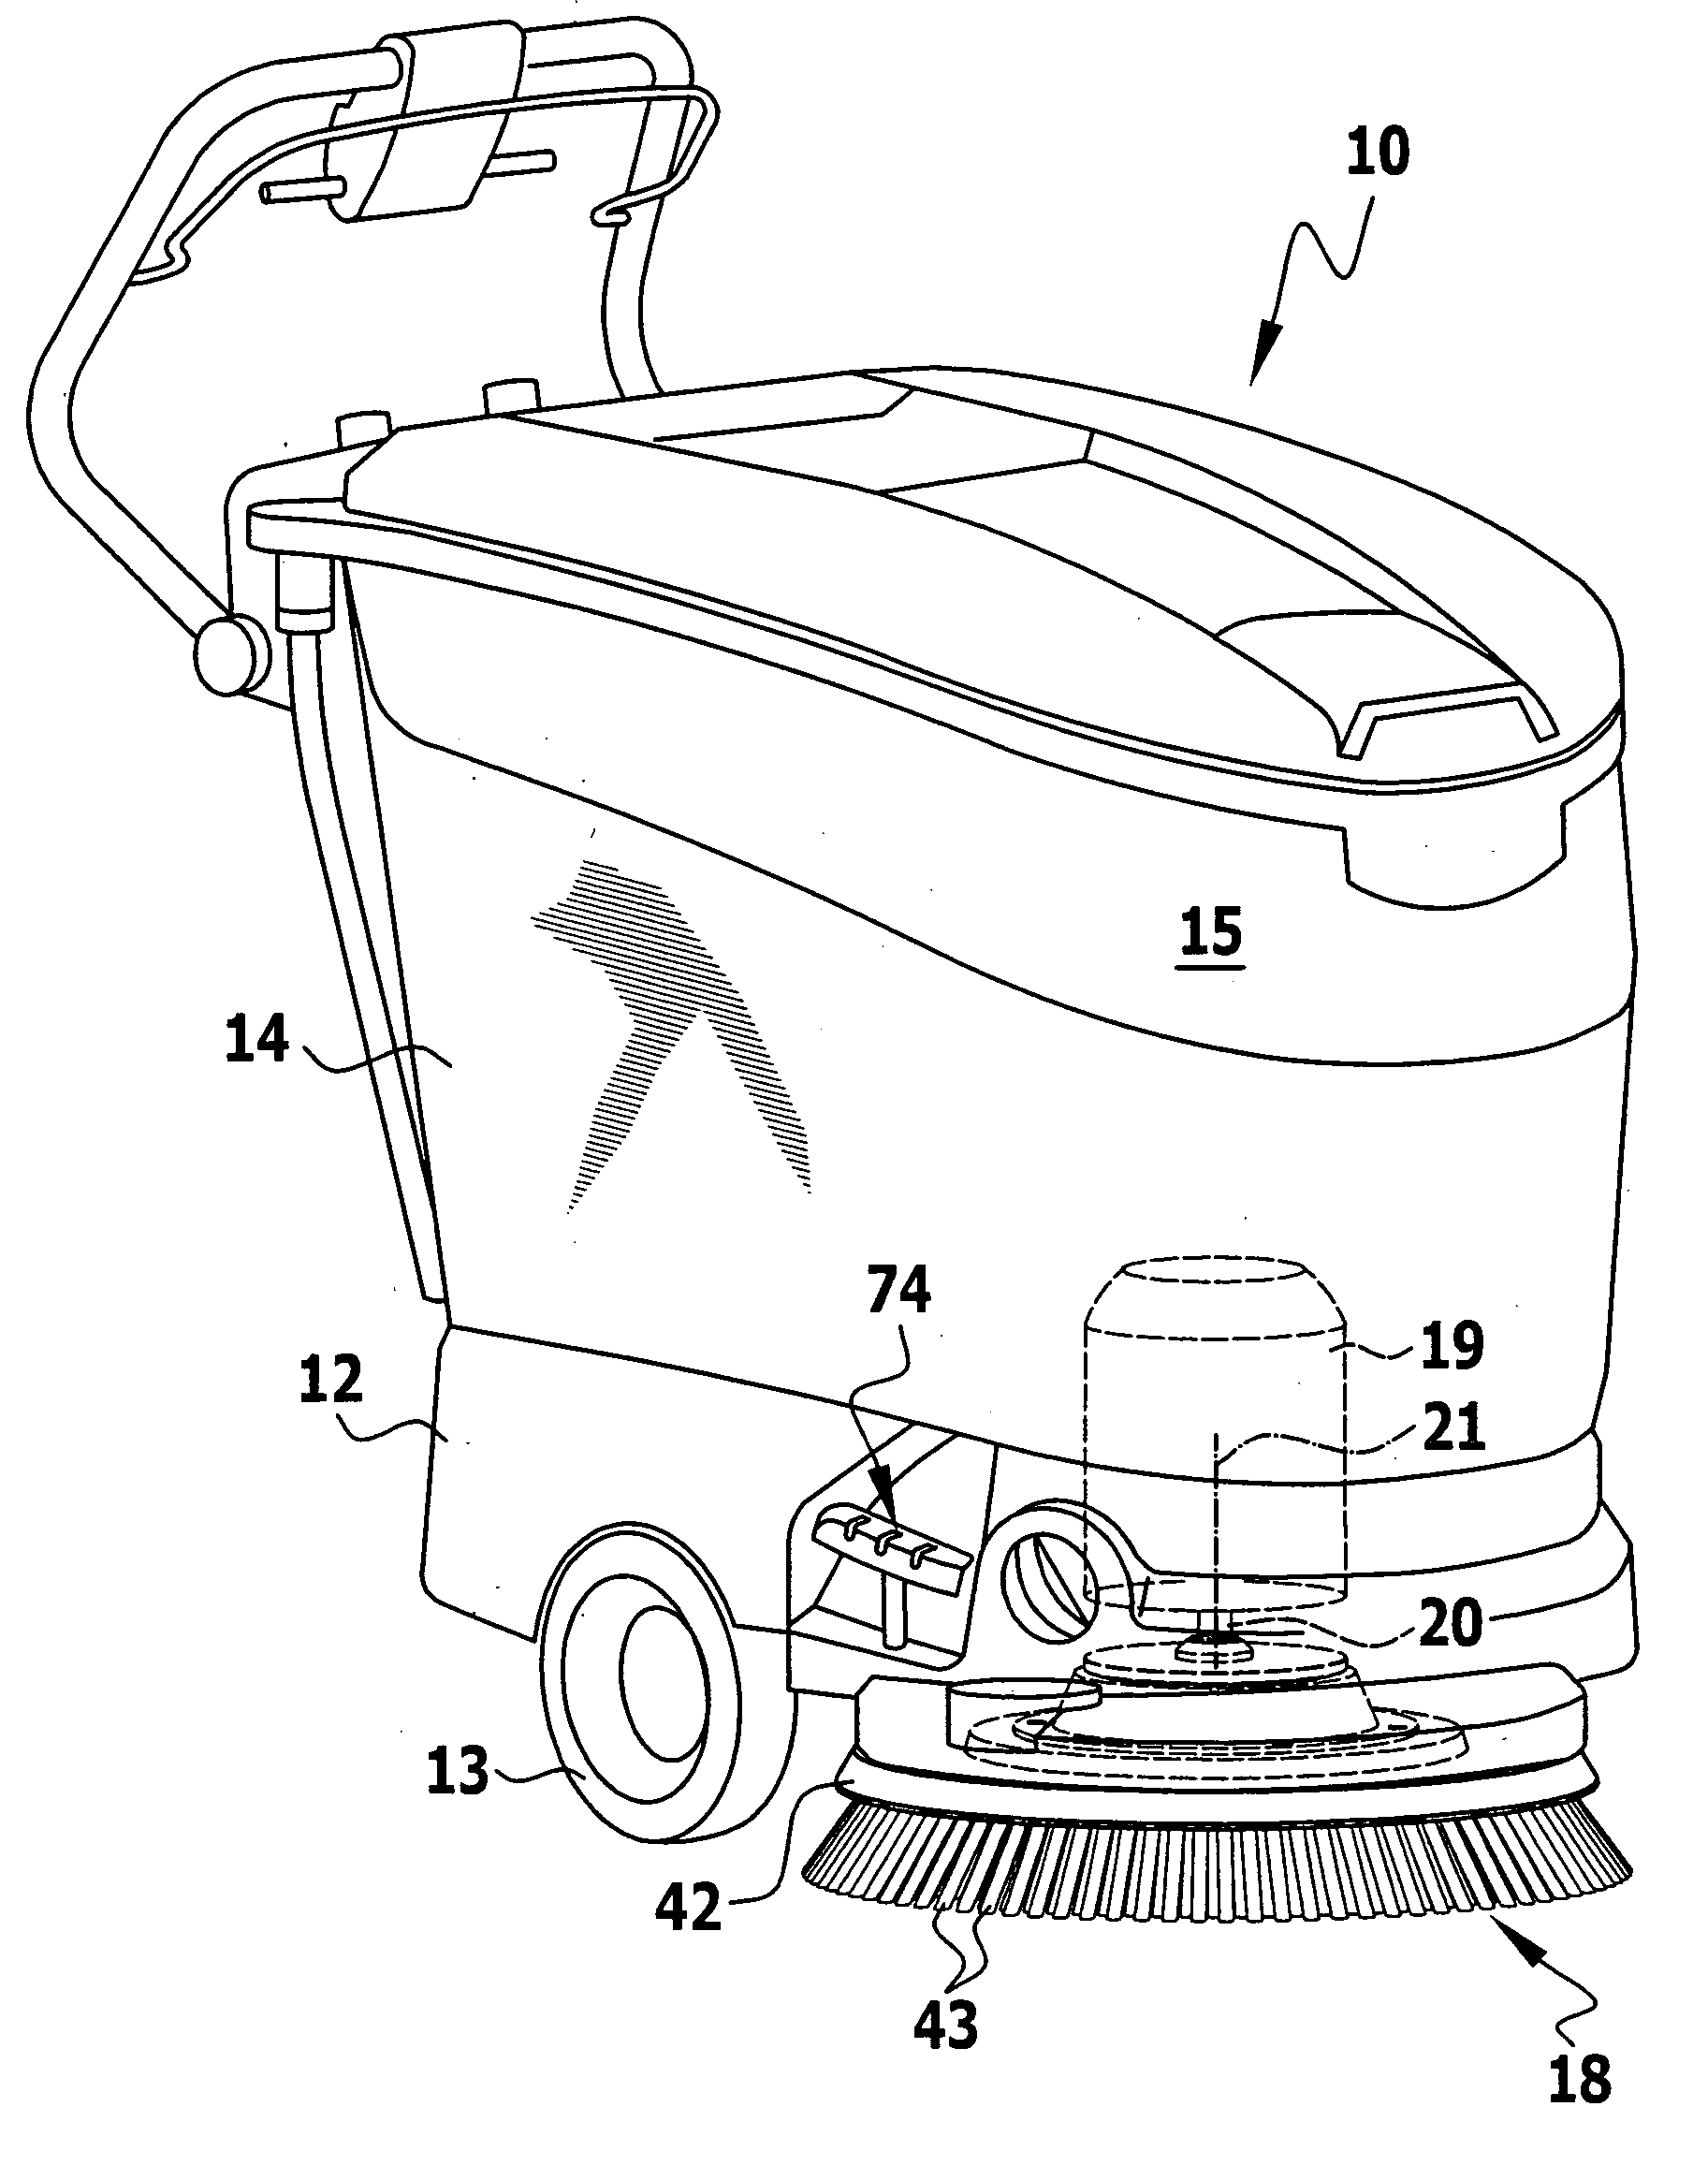 Mobile floor-cleaning machine